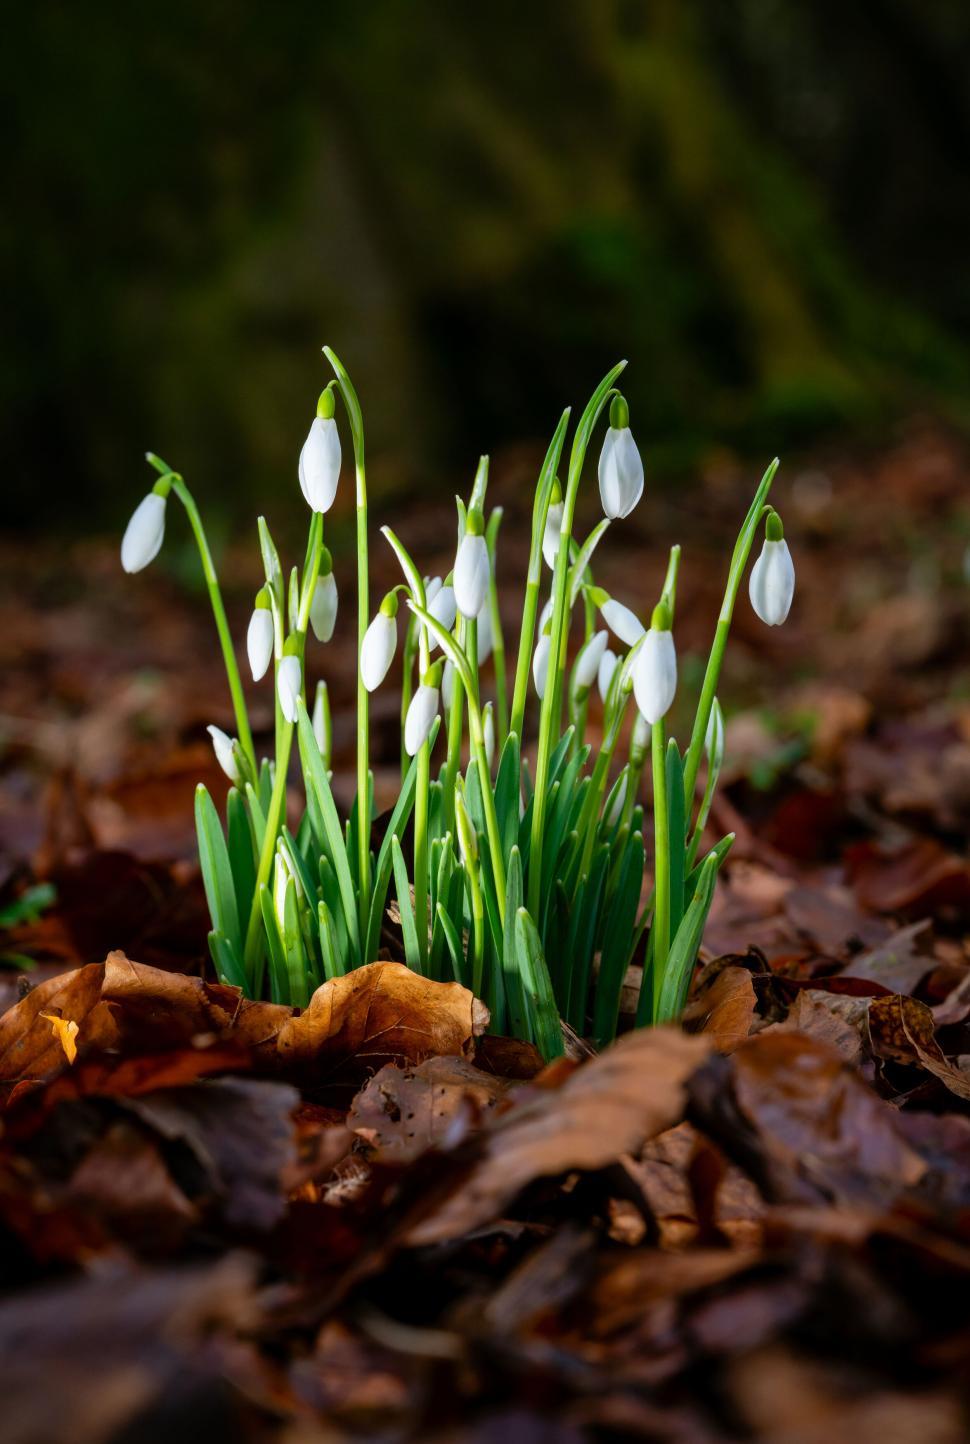 Free Image of Snowdrops emerging through fallen leaves 